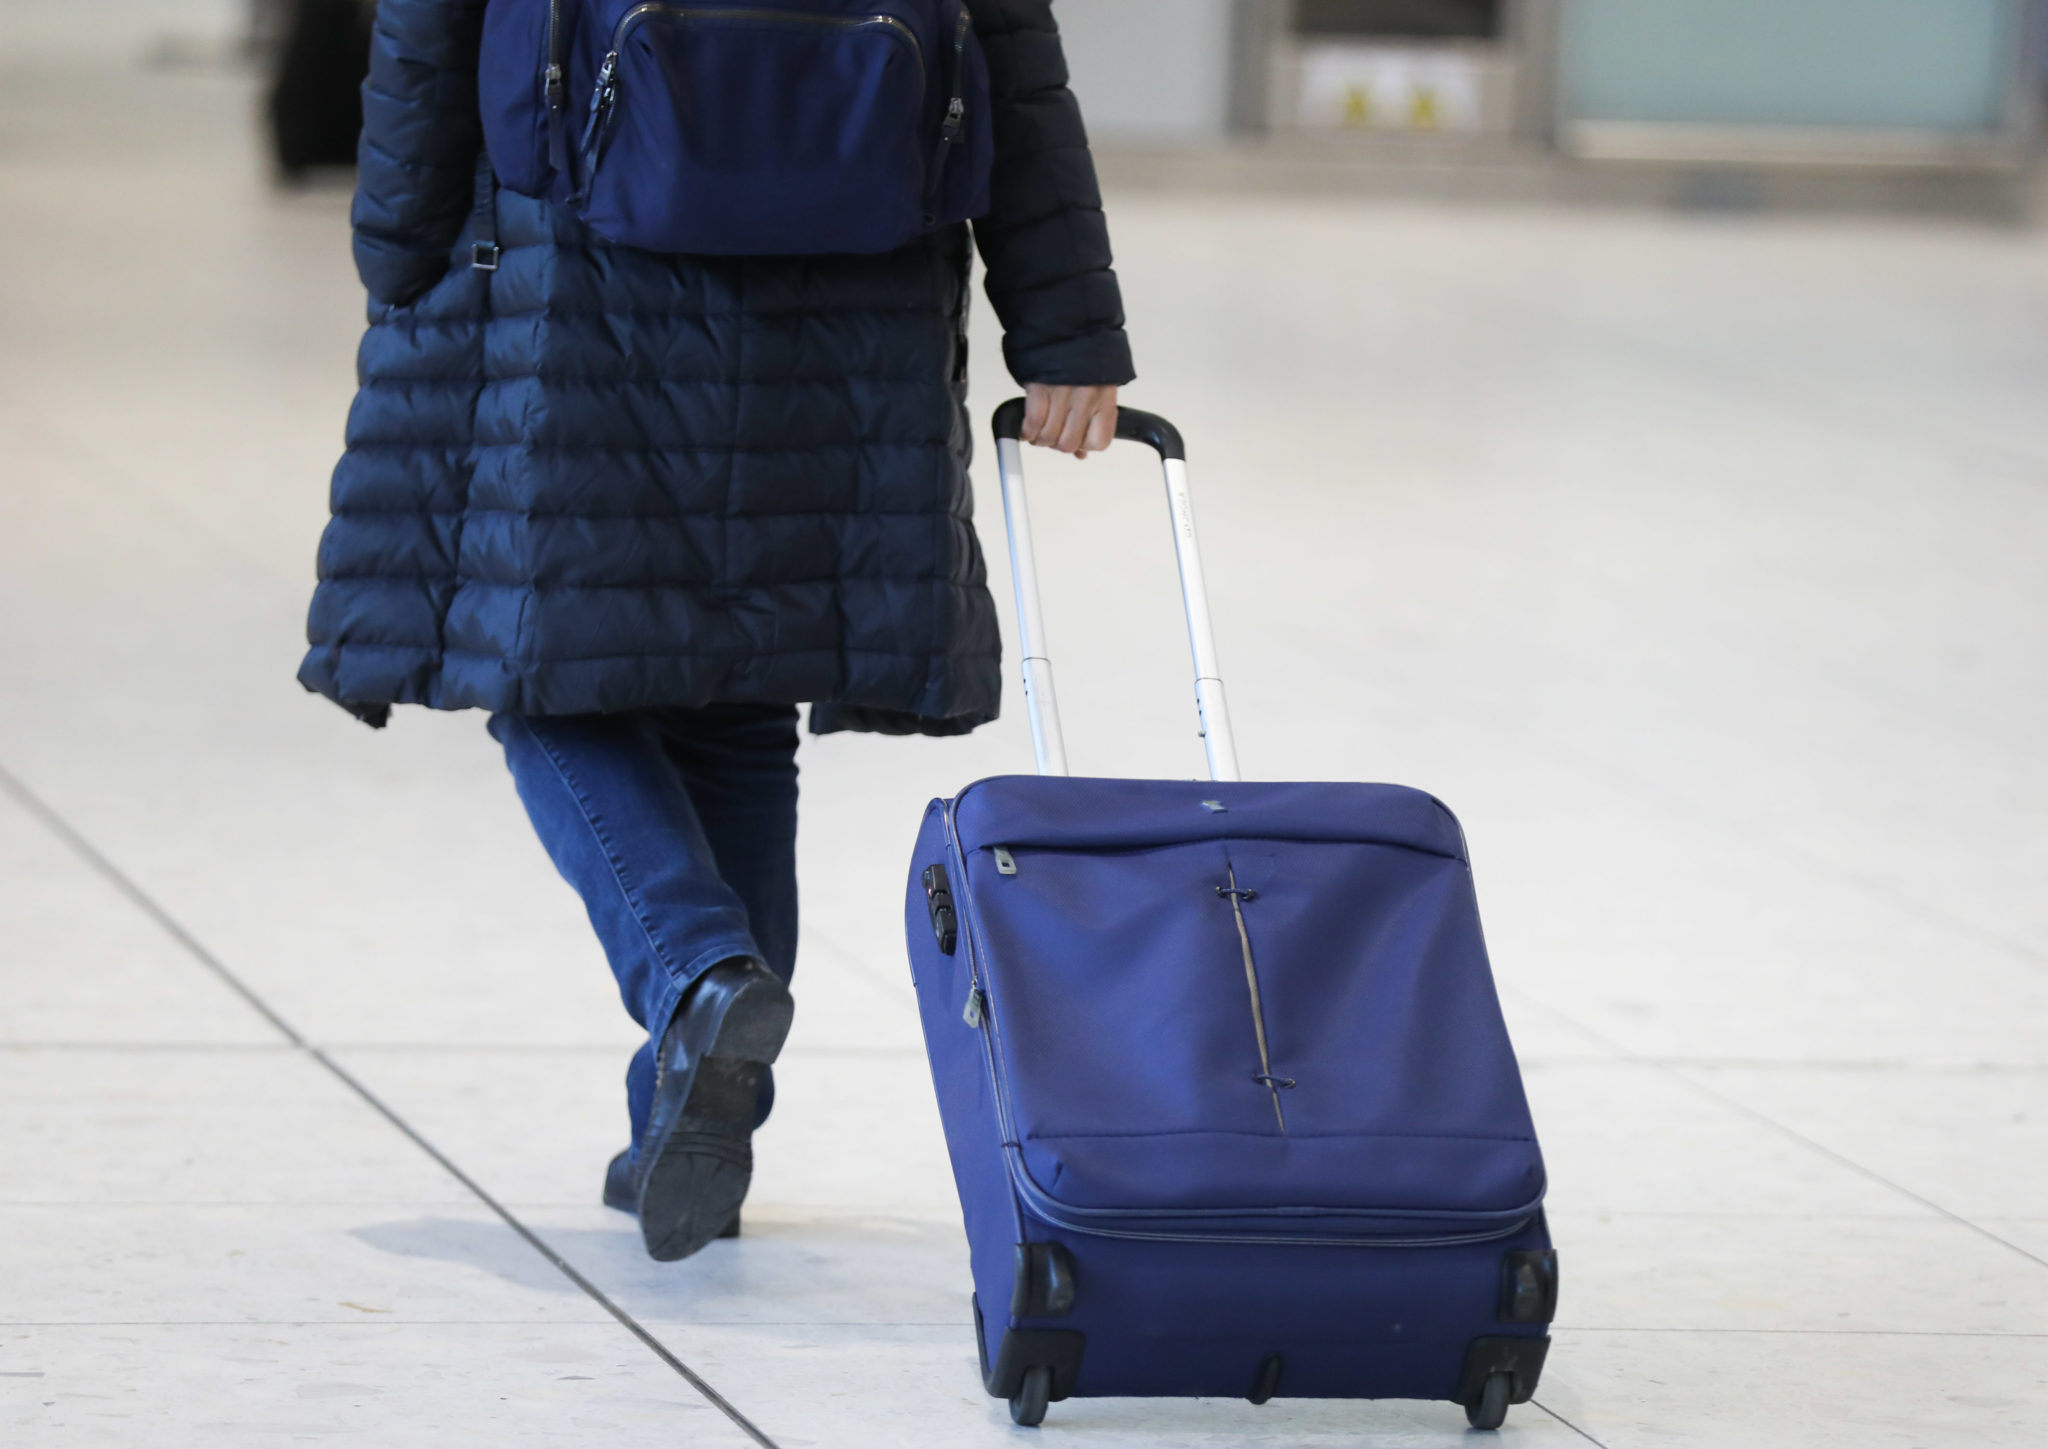 A passenger with a suitcase